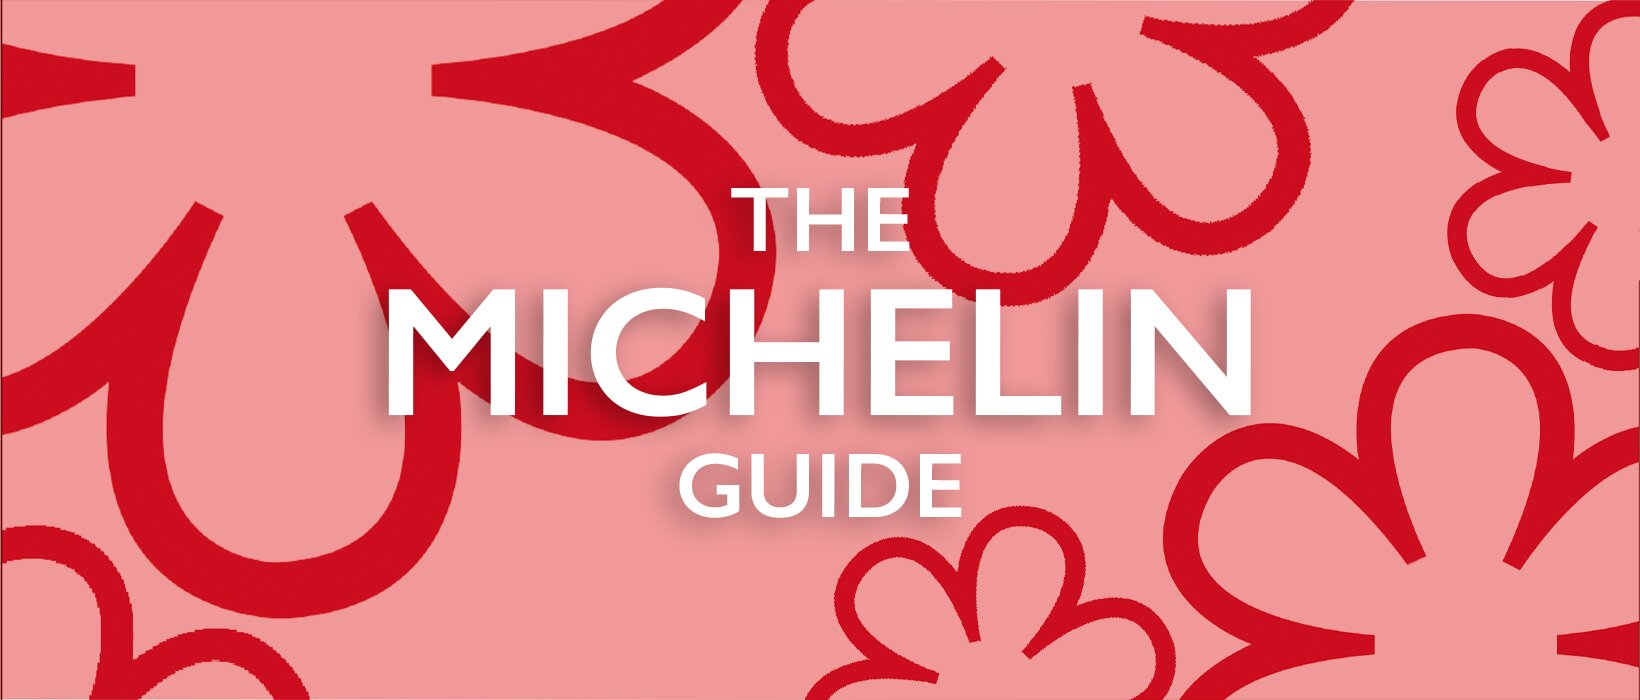 Michelin predictions: Which restaurants will gain a star in the 2023 guide?